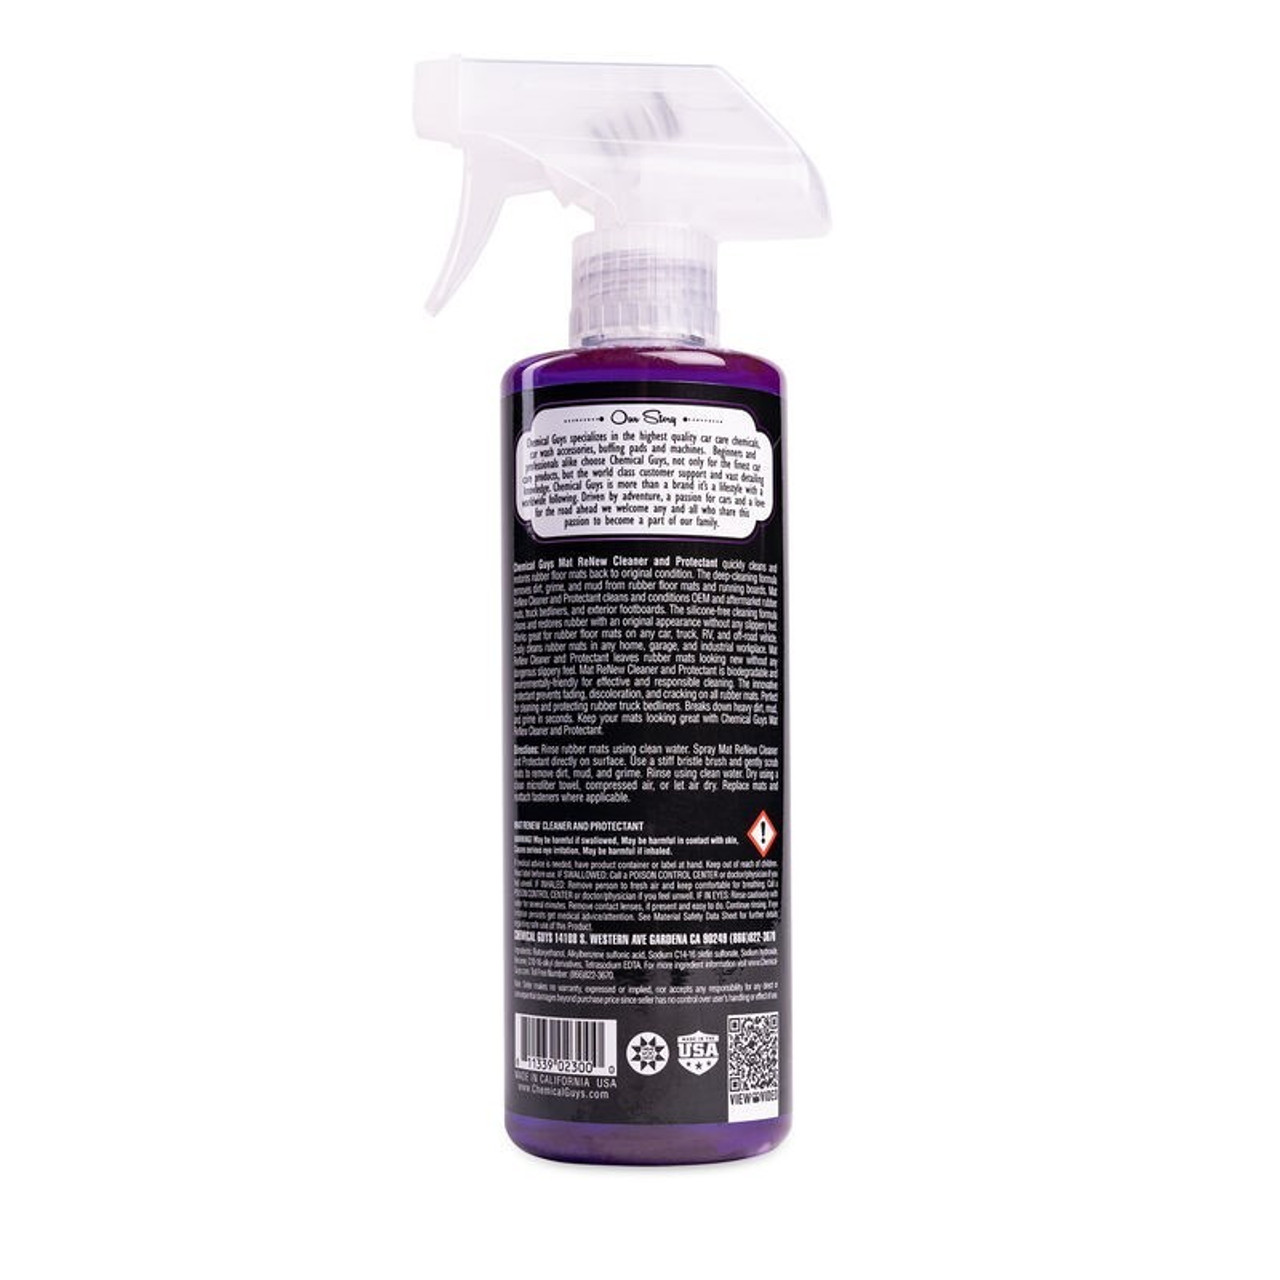 Chemical Guys Total Interior Cleaner and Protectant Spray 16oz